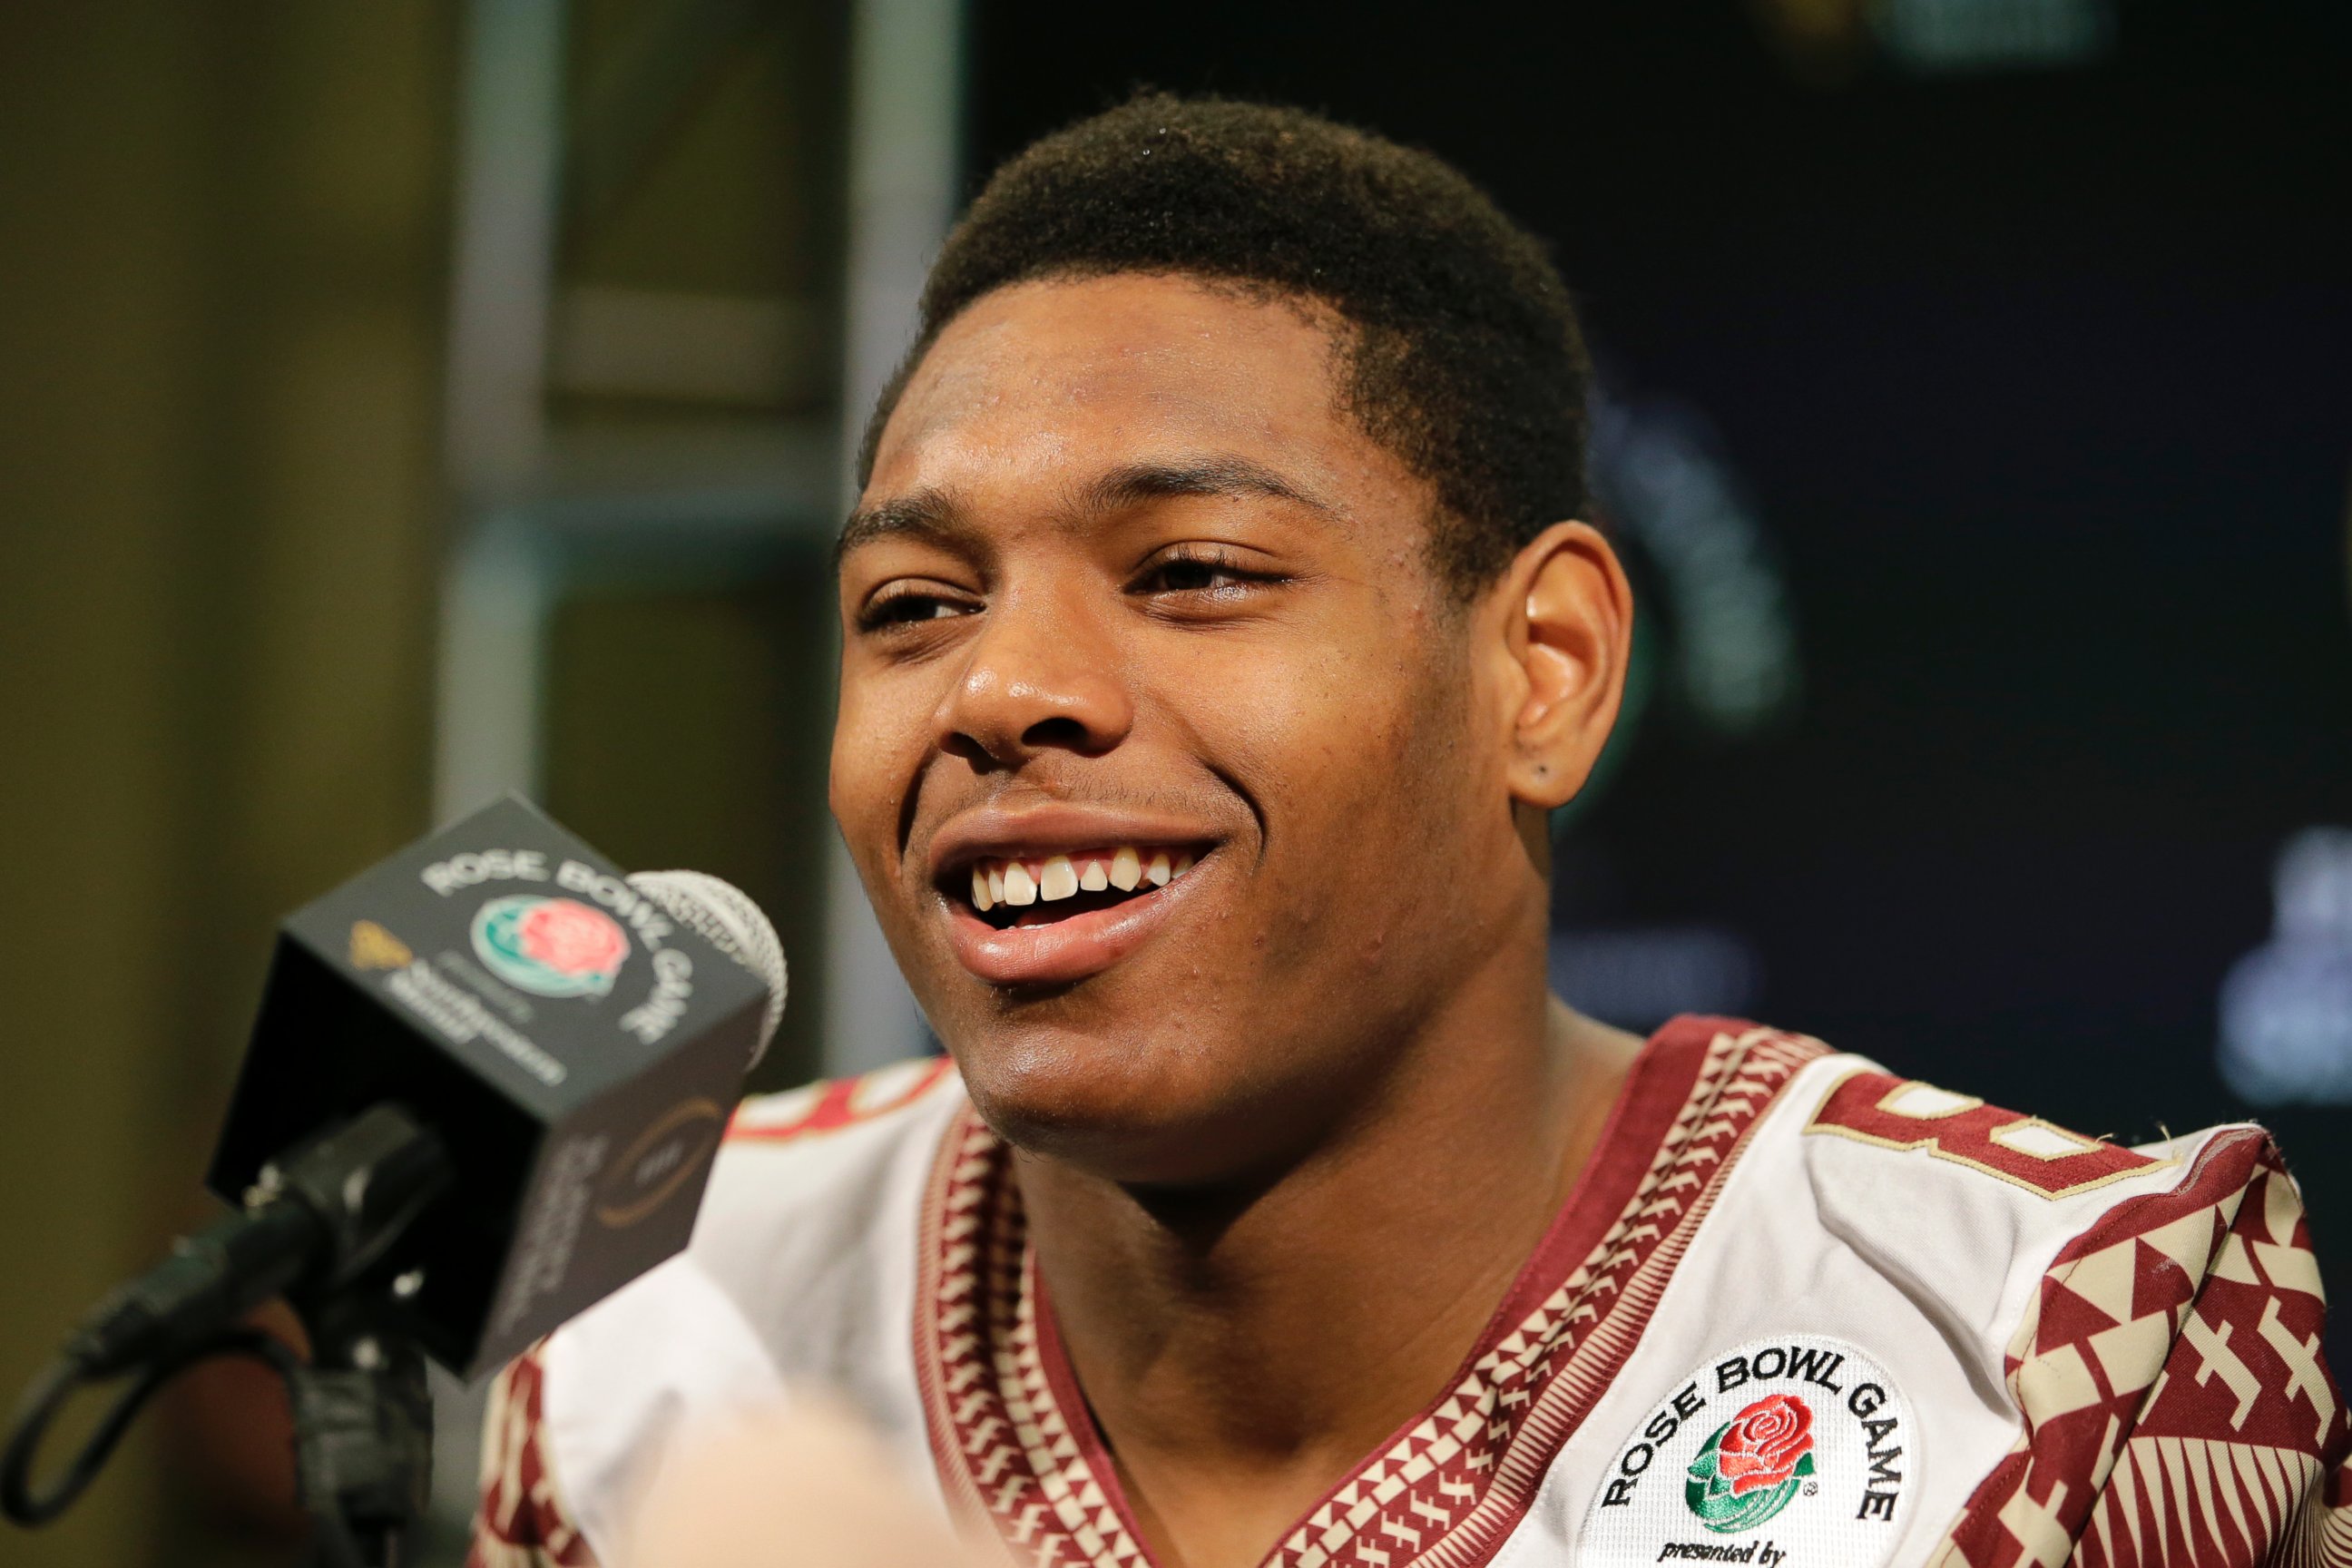 Florida State defensive back Jalen Ramsey smiles while talking to reporters during the team's media day Monday, Dec. 29, 2014, in Los Angeles. Florida State plays Oregon in the Rose Bowl NCAA college football playoff semifinal on New Year's Day.